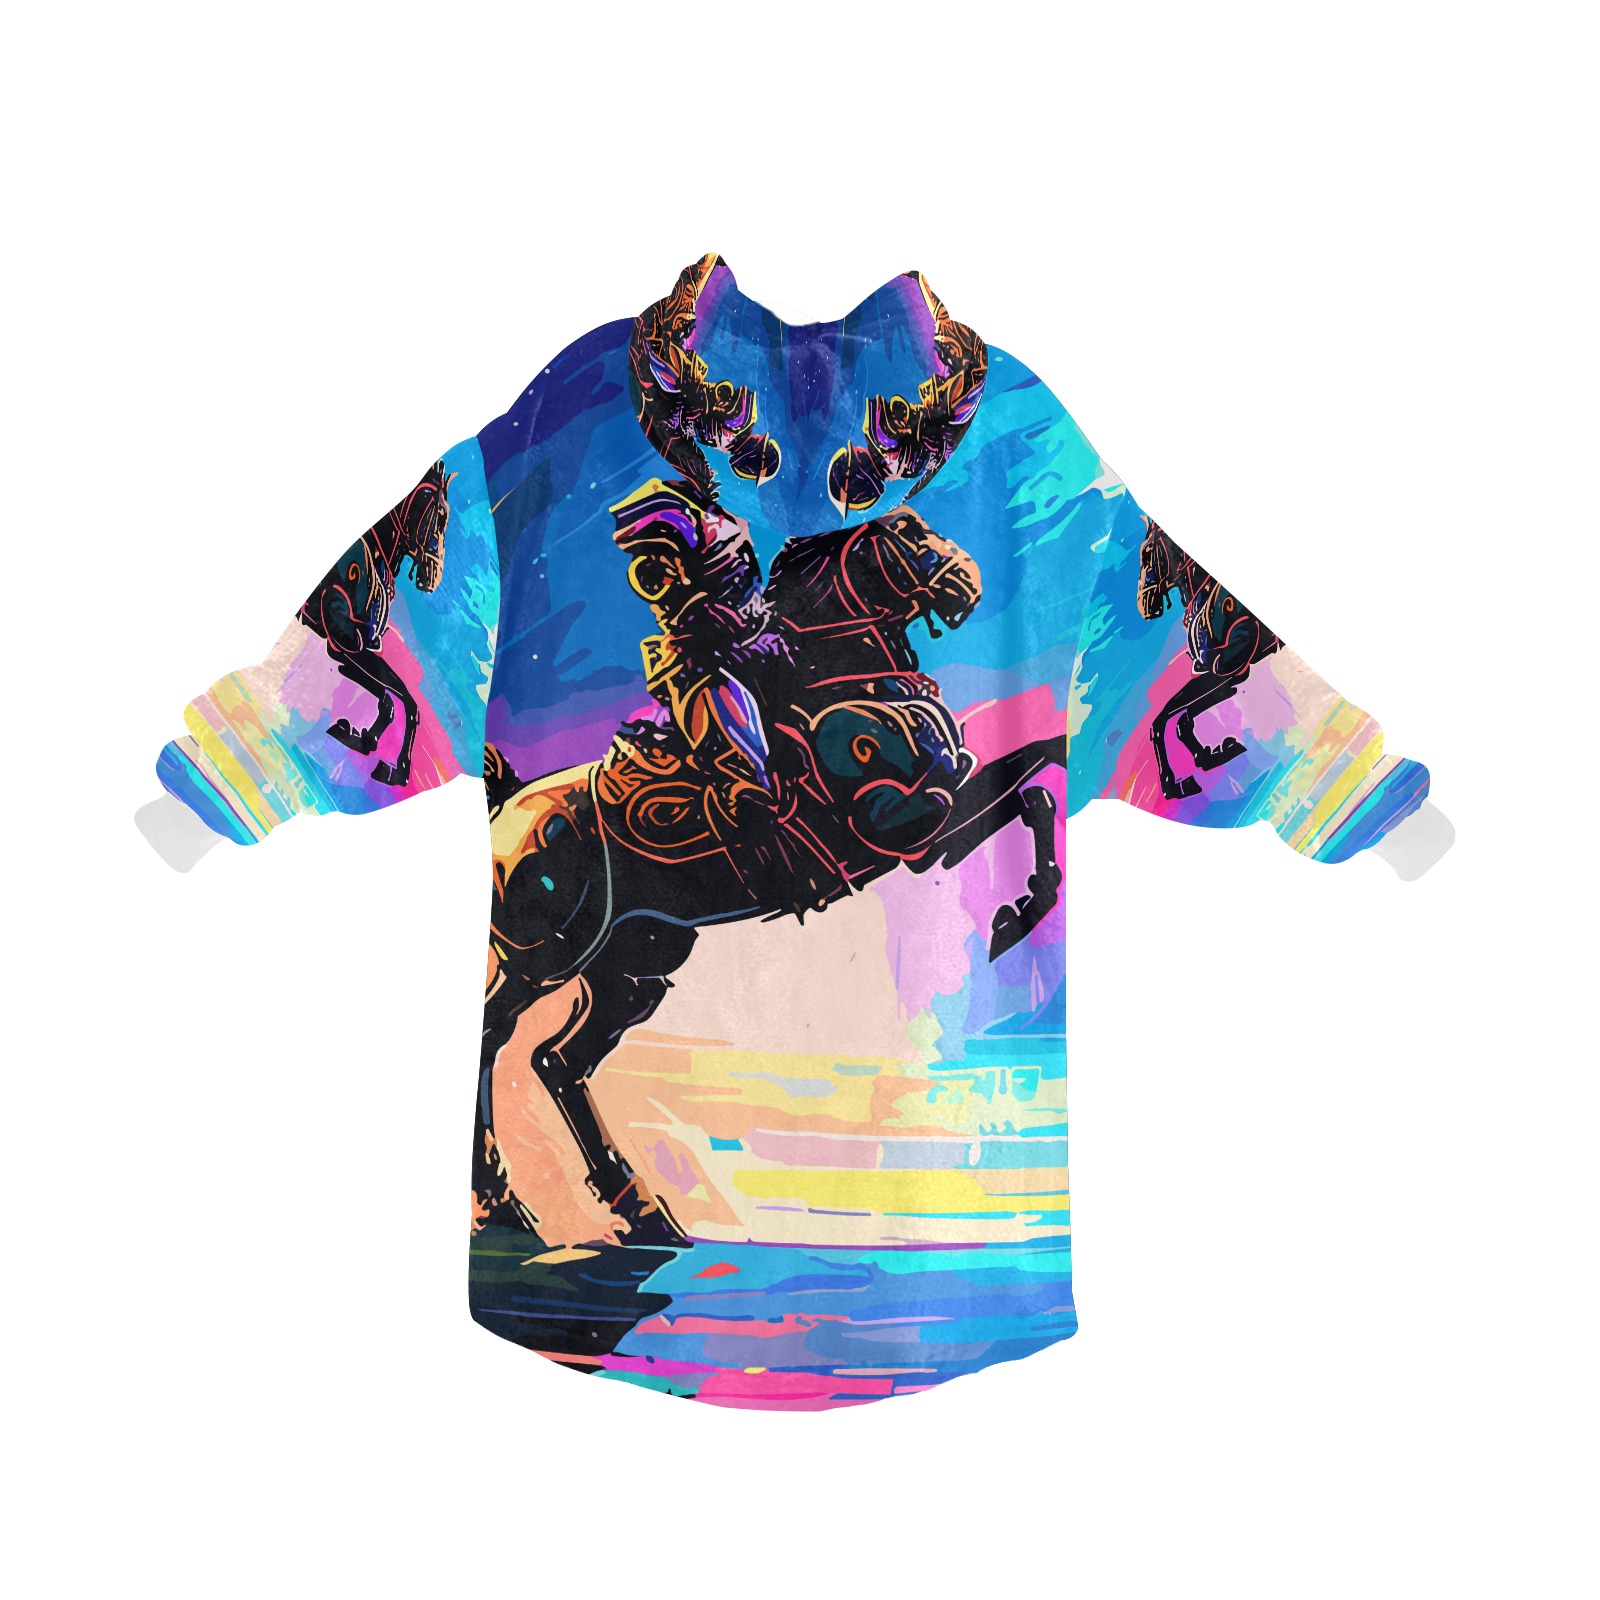 Knight On Horse Futuristic Cool Art Blanket Hoodie for Men